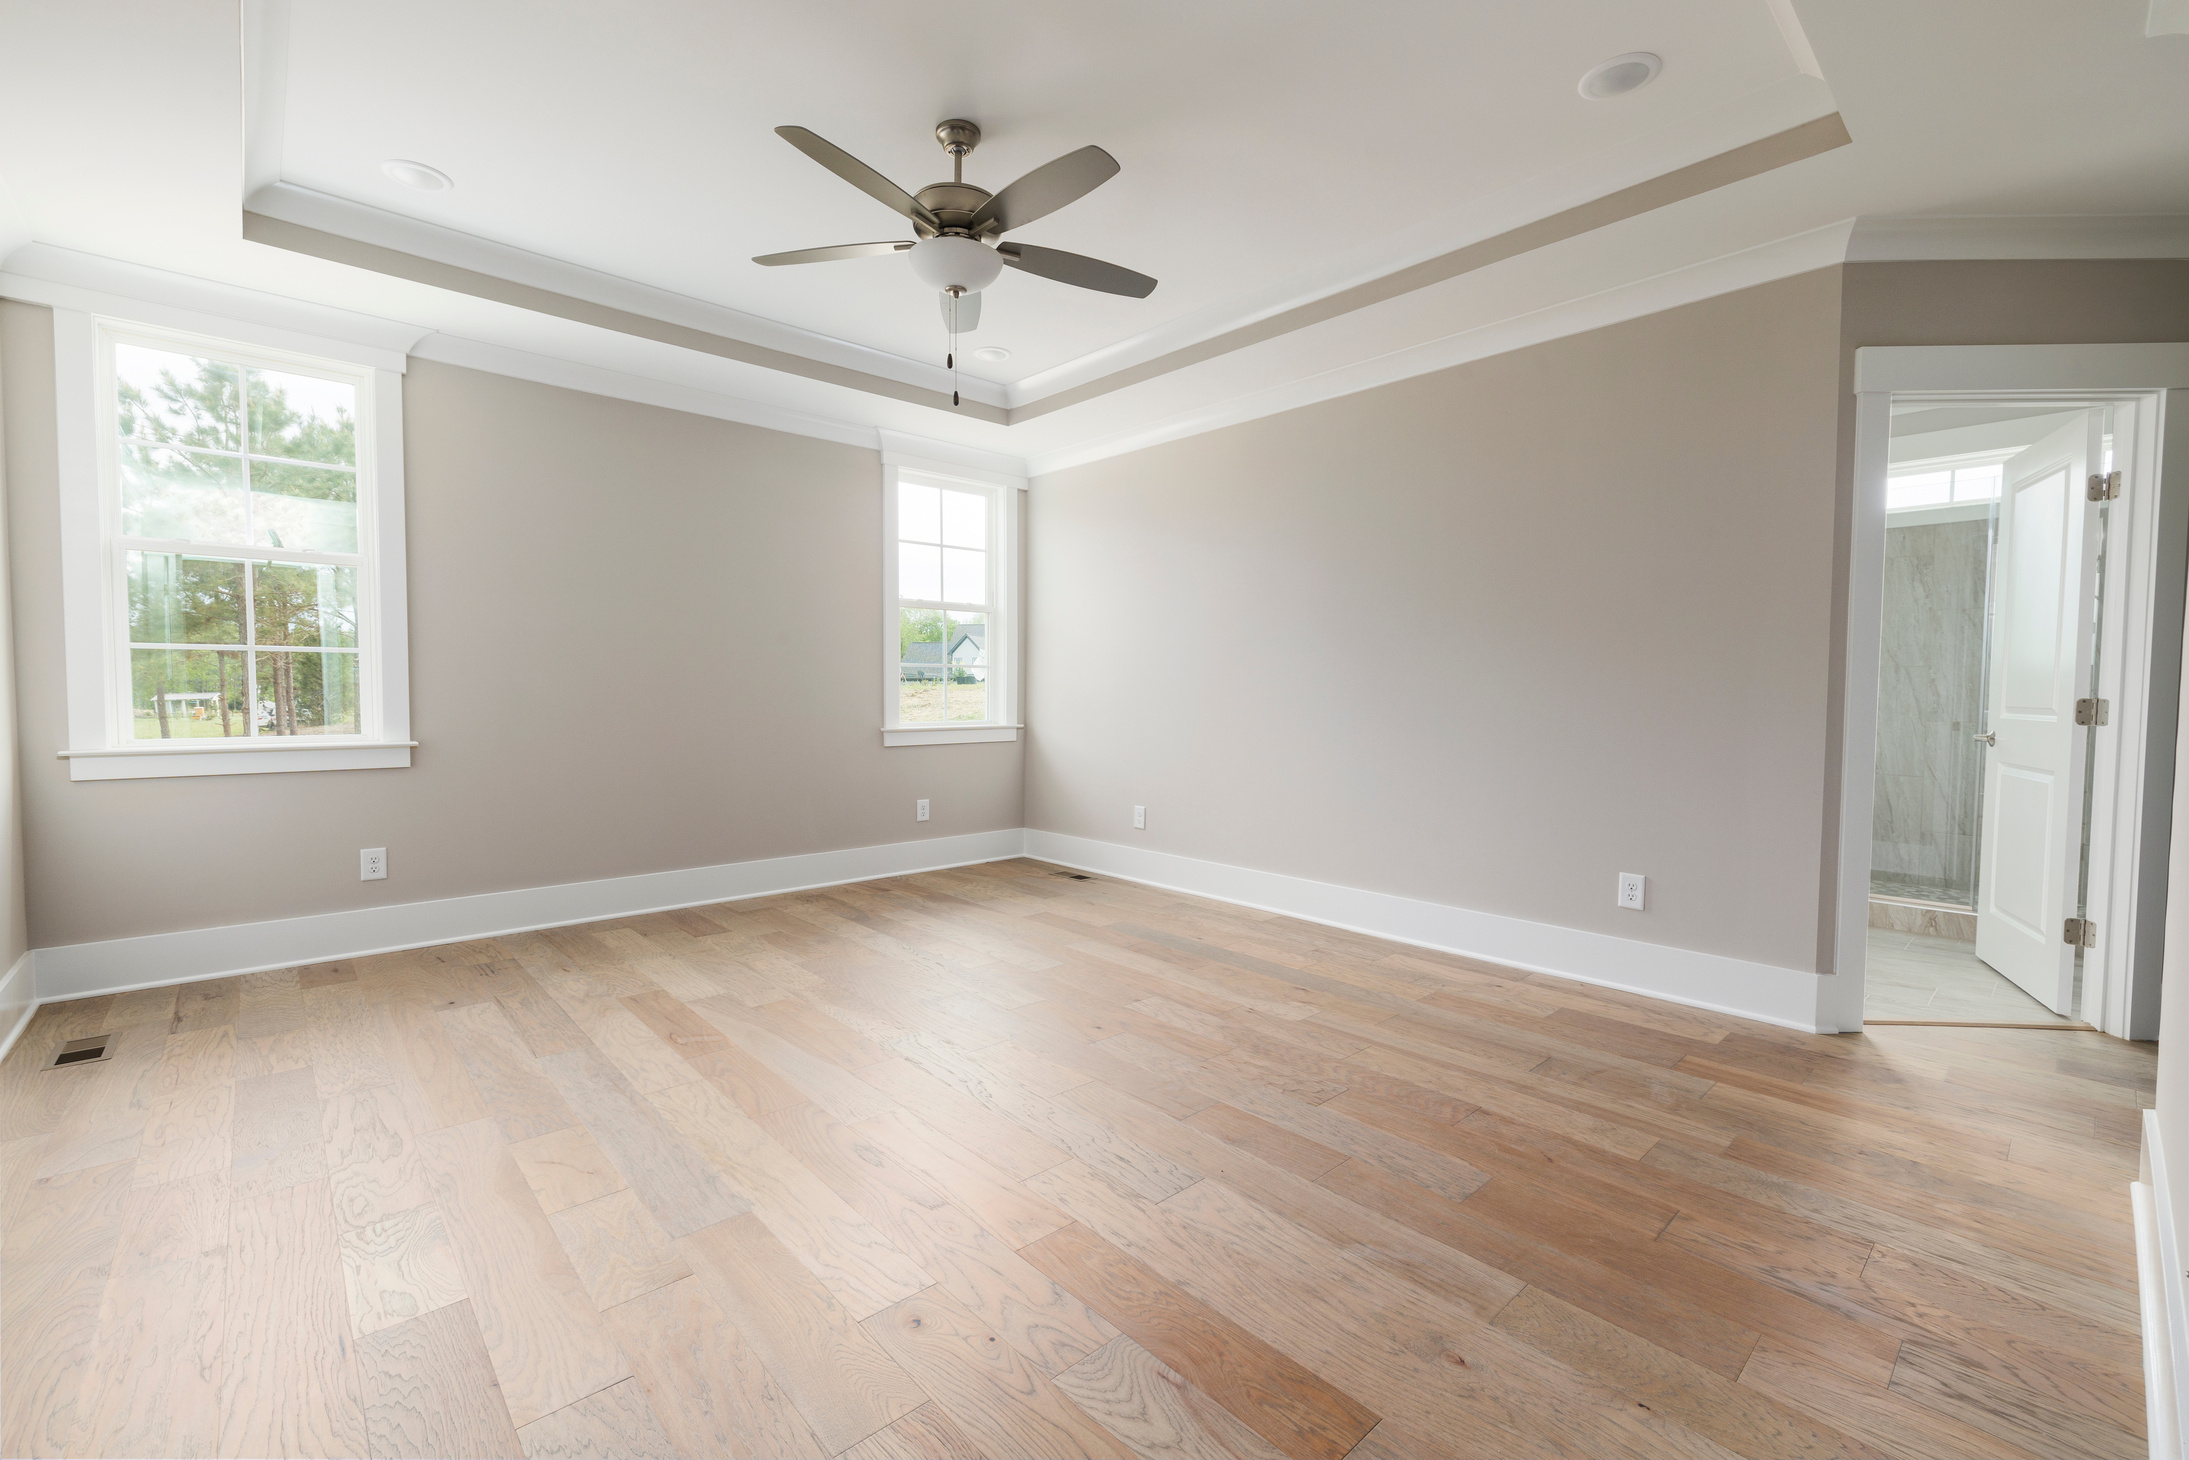 Spacious Room with a Ceiling Fan